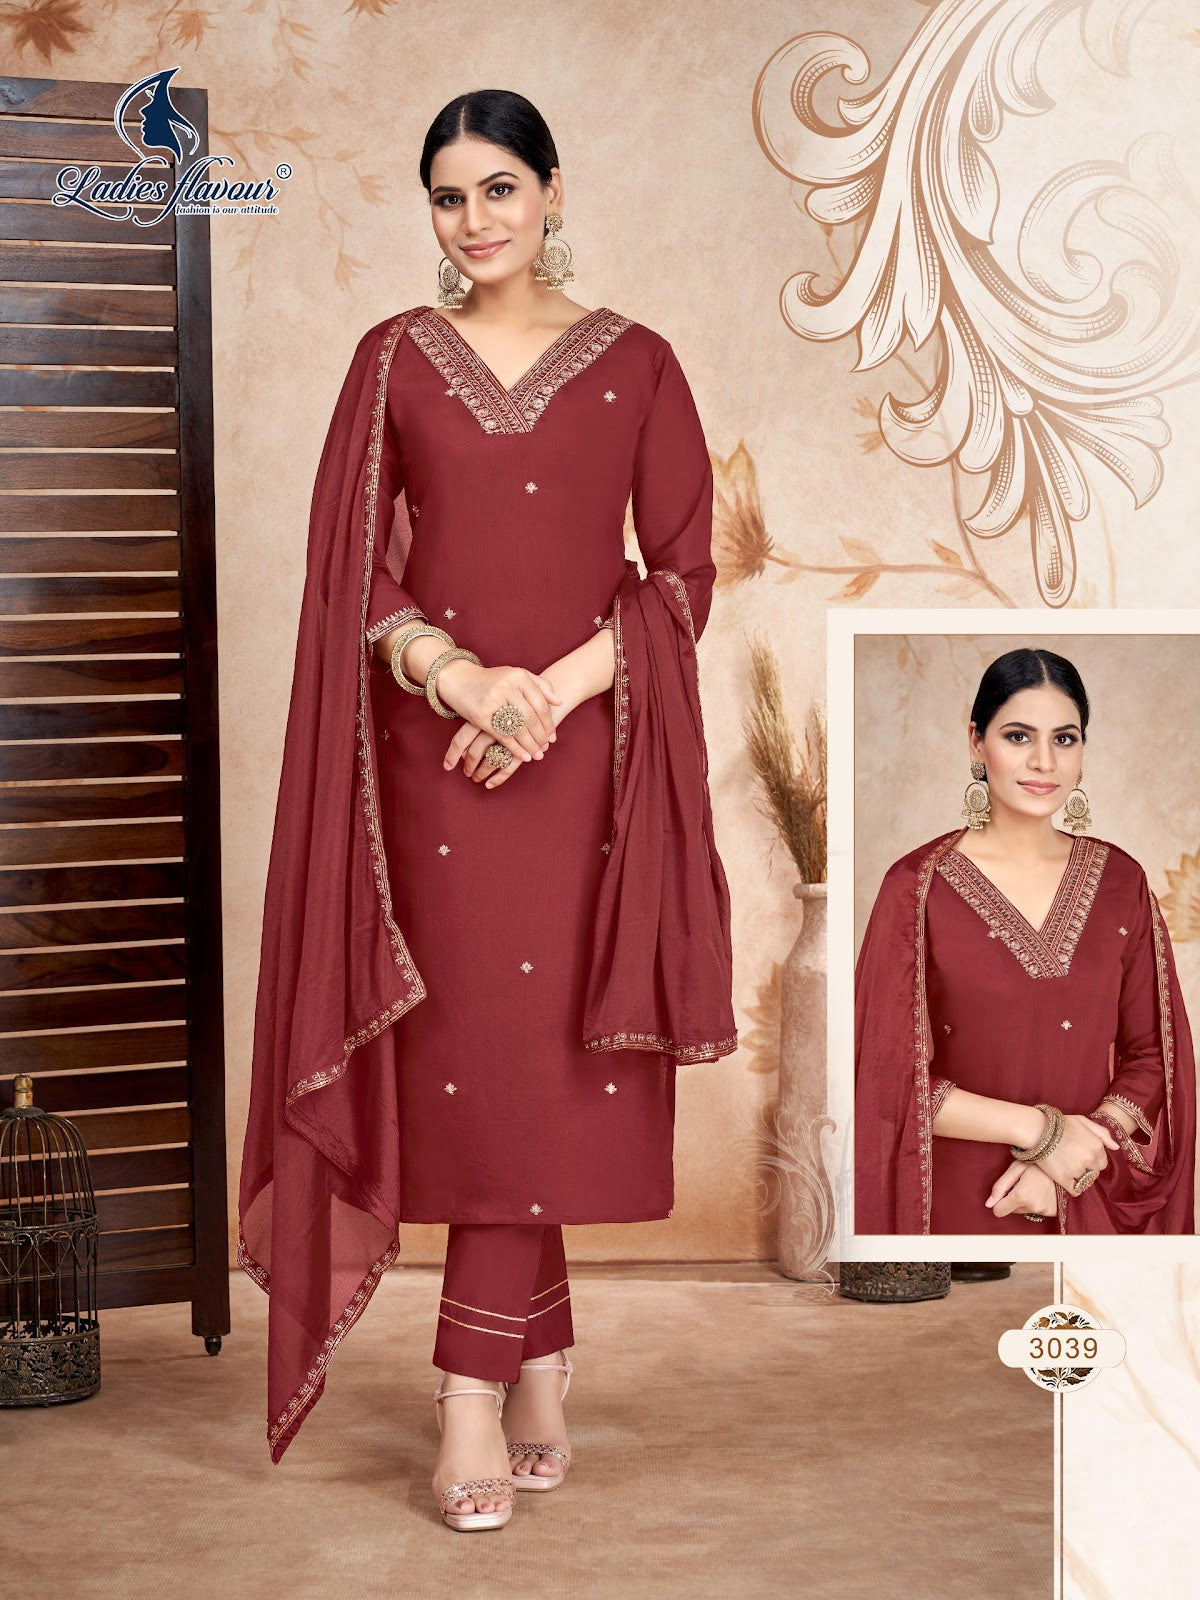 3039-3042 Ladies Flavour Roman Readymade Pant Style Suits